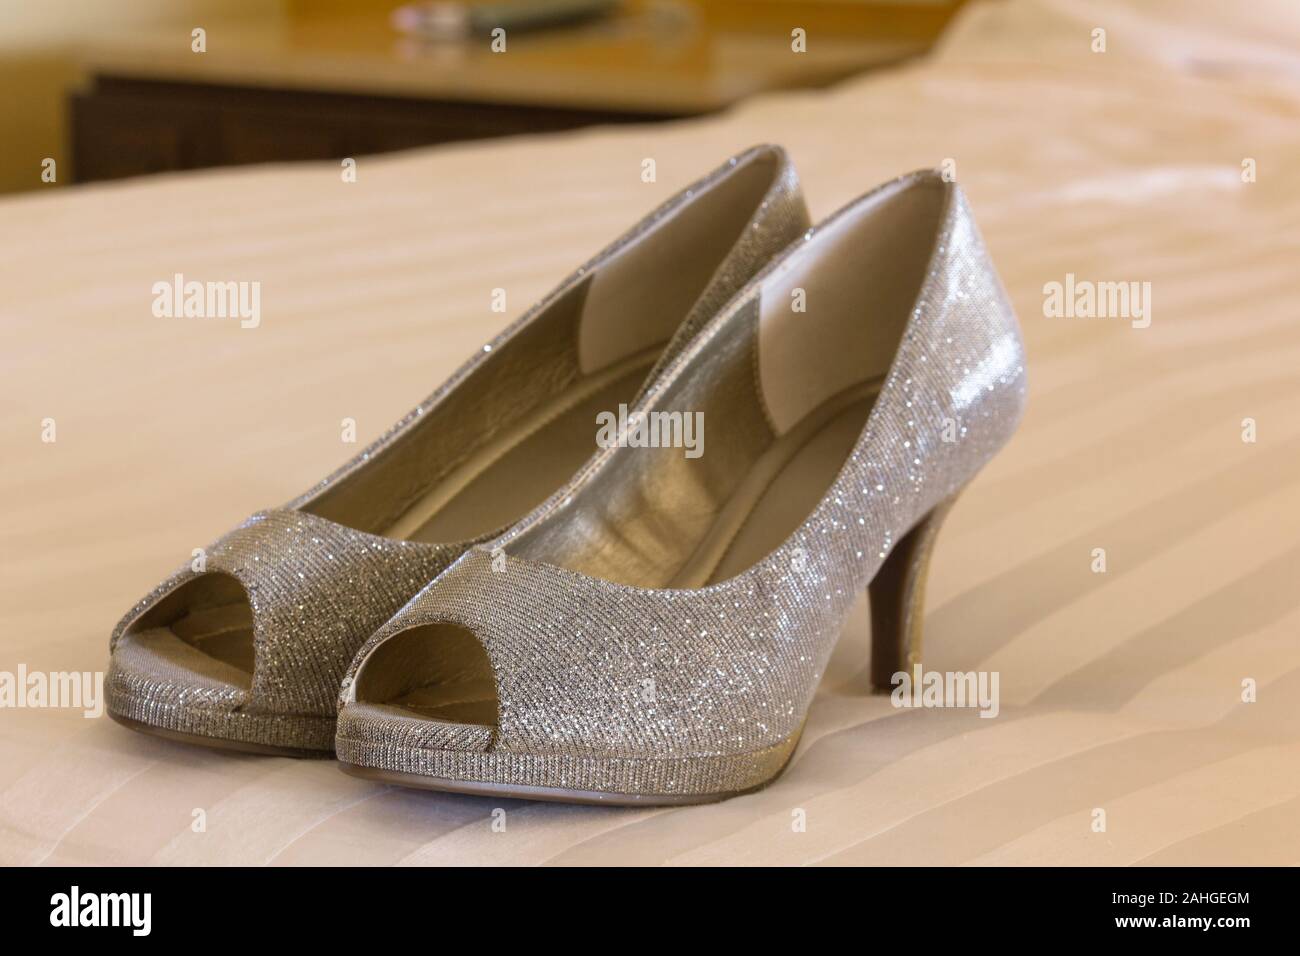 Bride's silver shoes on white cover sheet bed. Wedding ceremony preparation concept Stock Photo